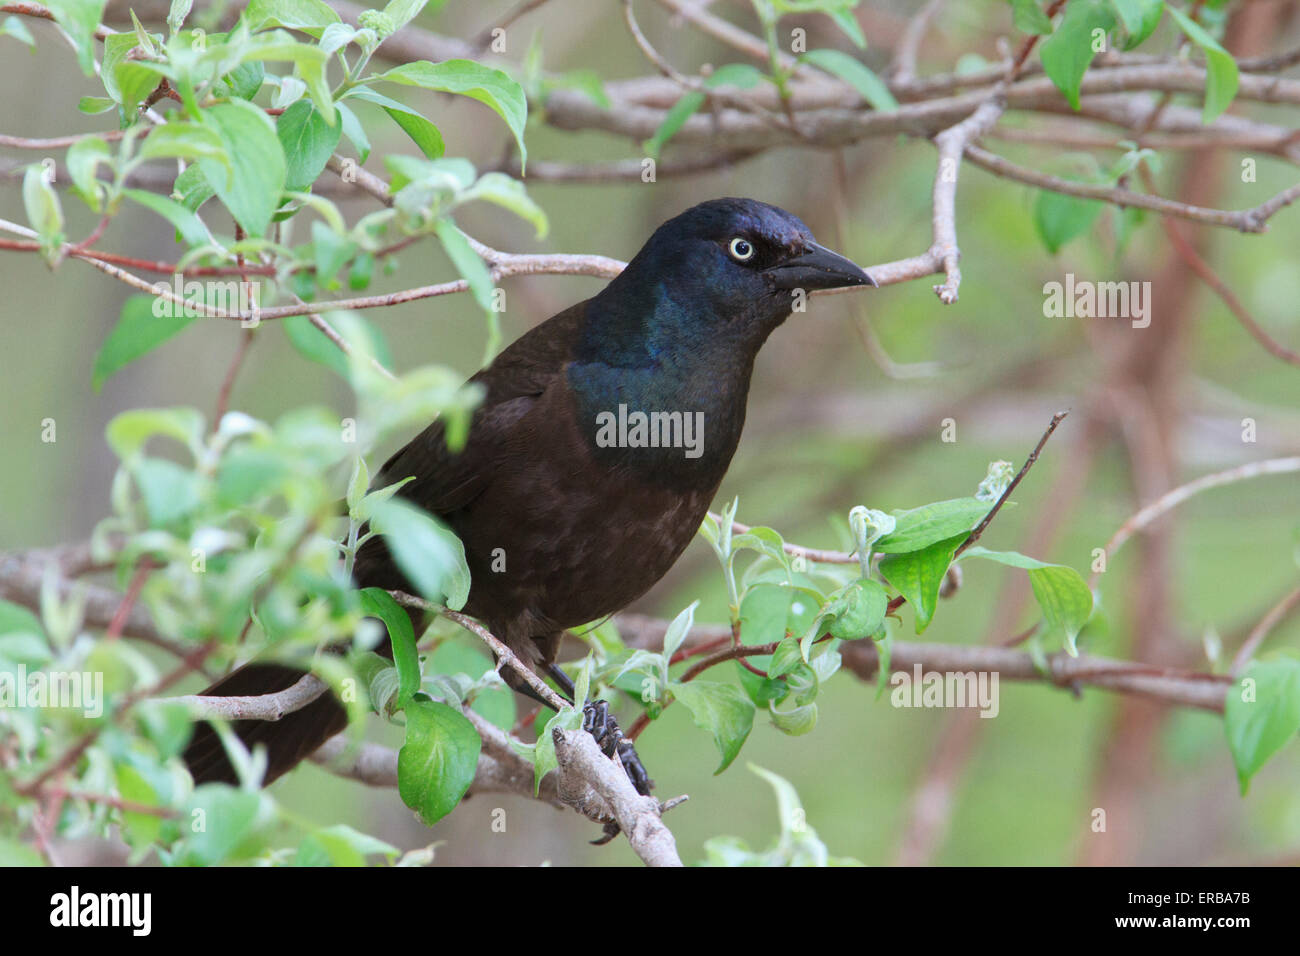 Common Grackle (Quiscalus quiscula ) Stock Photo